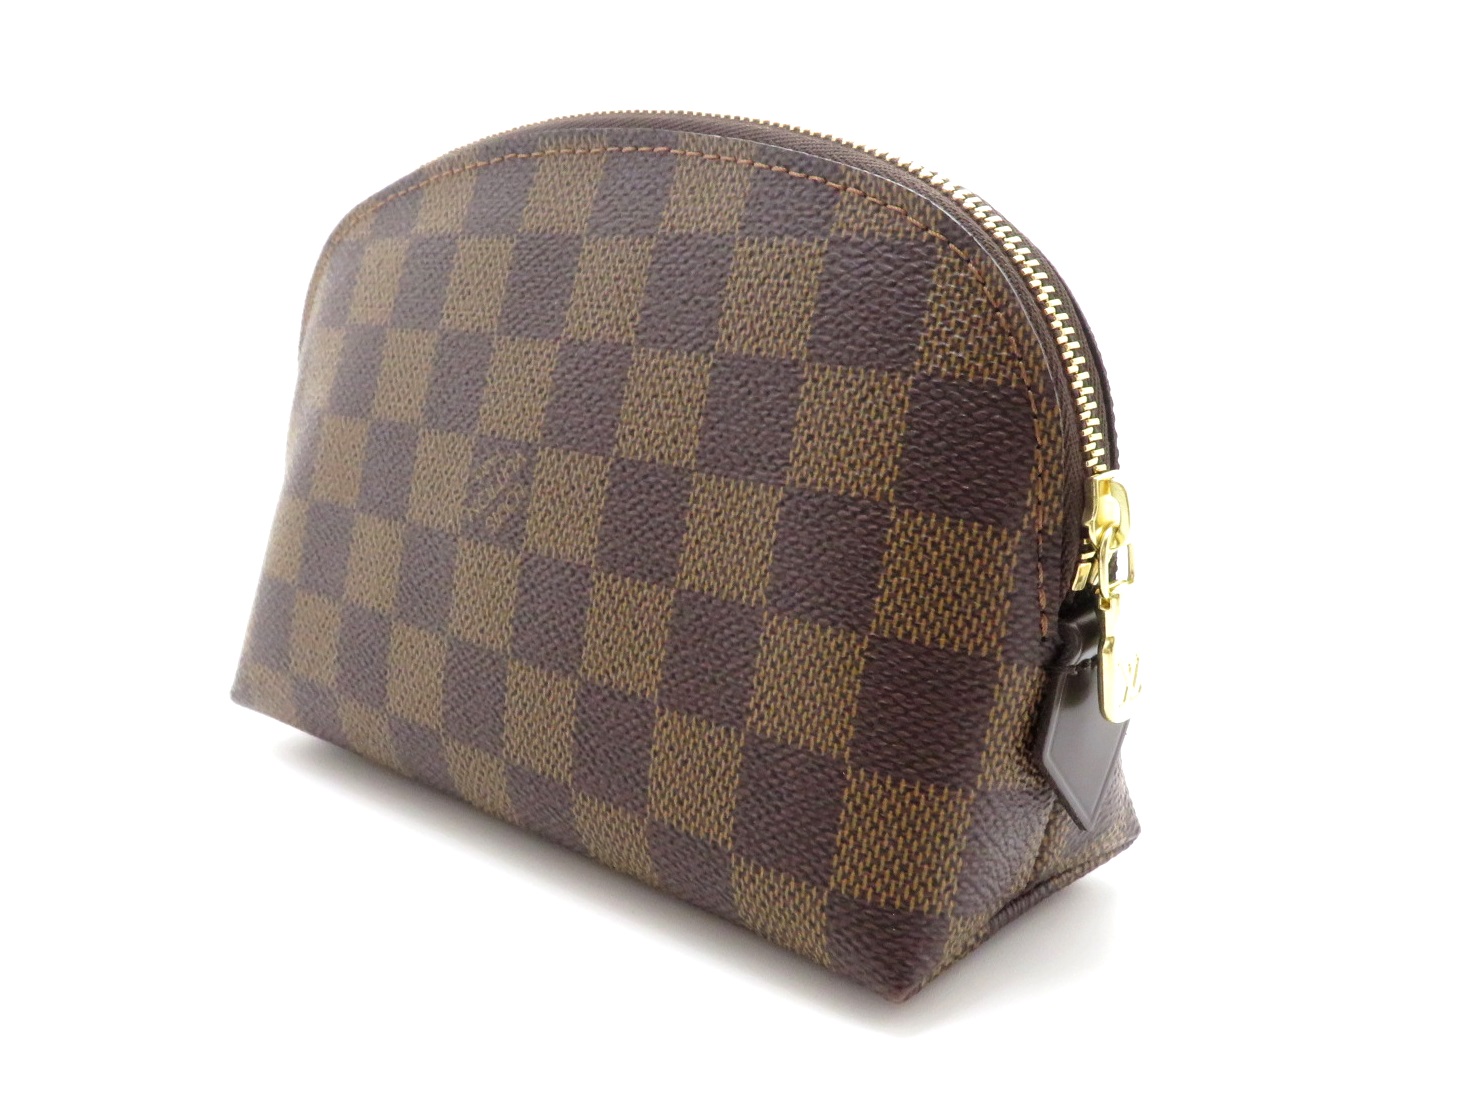 LOUIS VUITTON　ルイヴィトン　ポシェット・コスメティック　コスメポーチ　ダミエ　N47516　【430】2148103385308